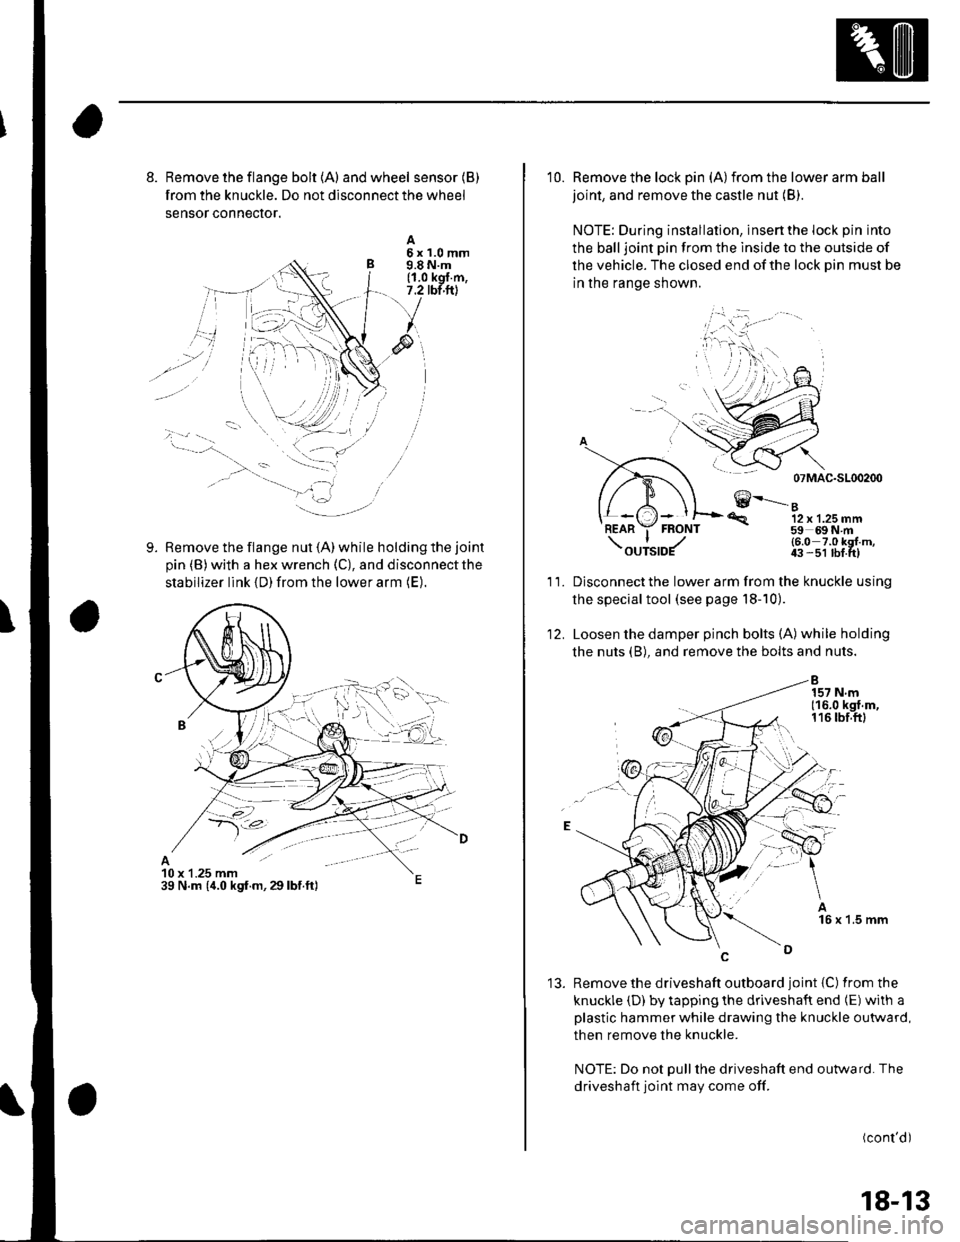 HONDA CIVIC 2003 7.G User Guide 8. Remove the flange bolt {A) andwheel sensor(B)
from the knuckle. Do not disconnect the wheel
sensor conneclor.
Remove the flange nut (A) while holding the joint
pin (B) with a hex wrench (C), and di